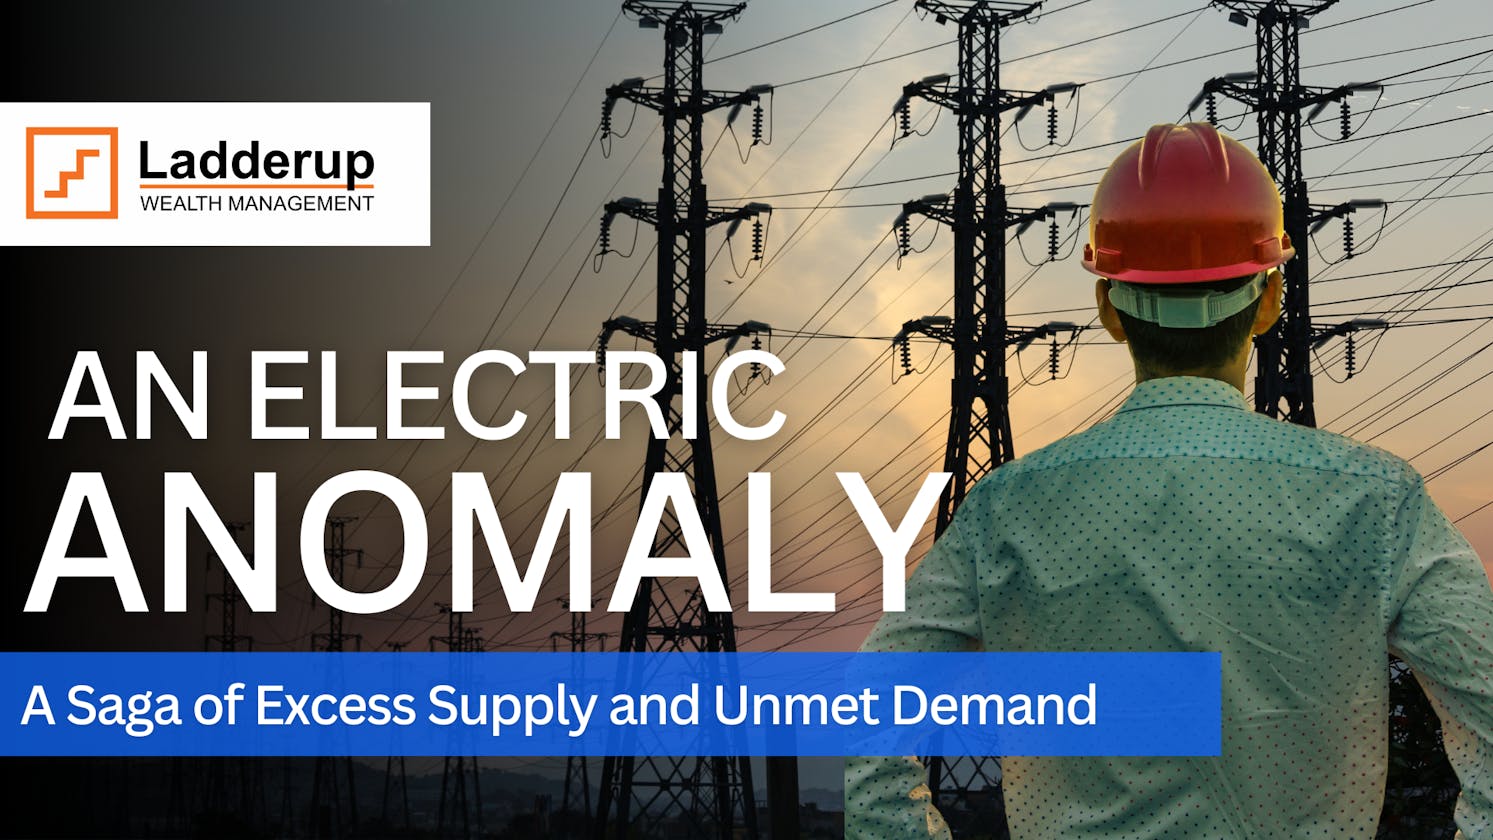 An Electric Anomaly: A Saga of Excess Supply and Unmet Demand